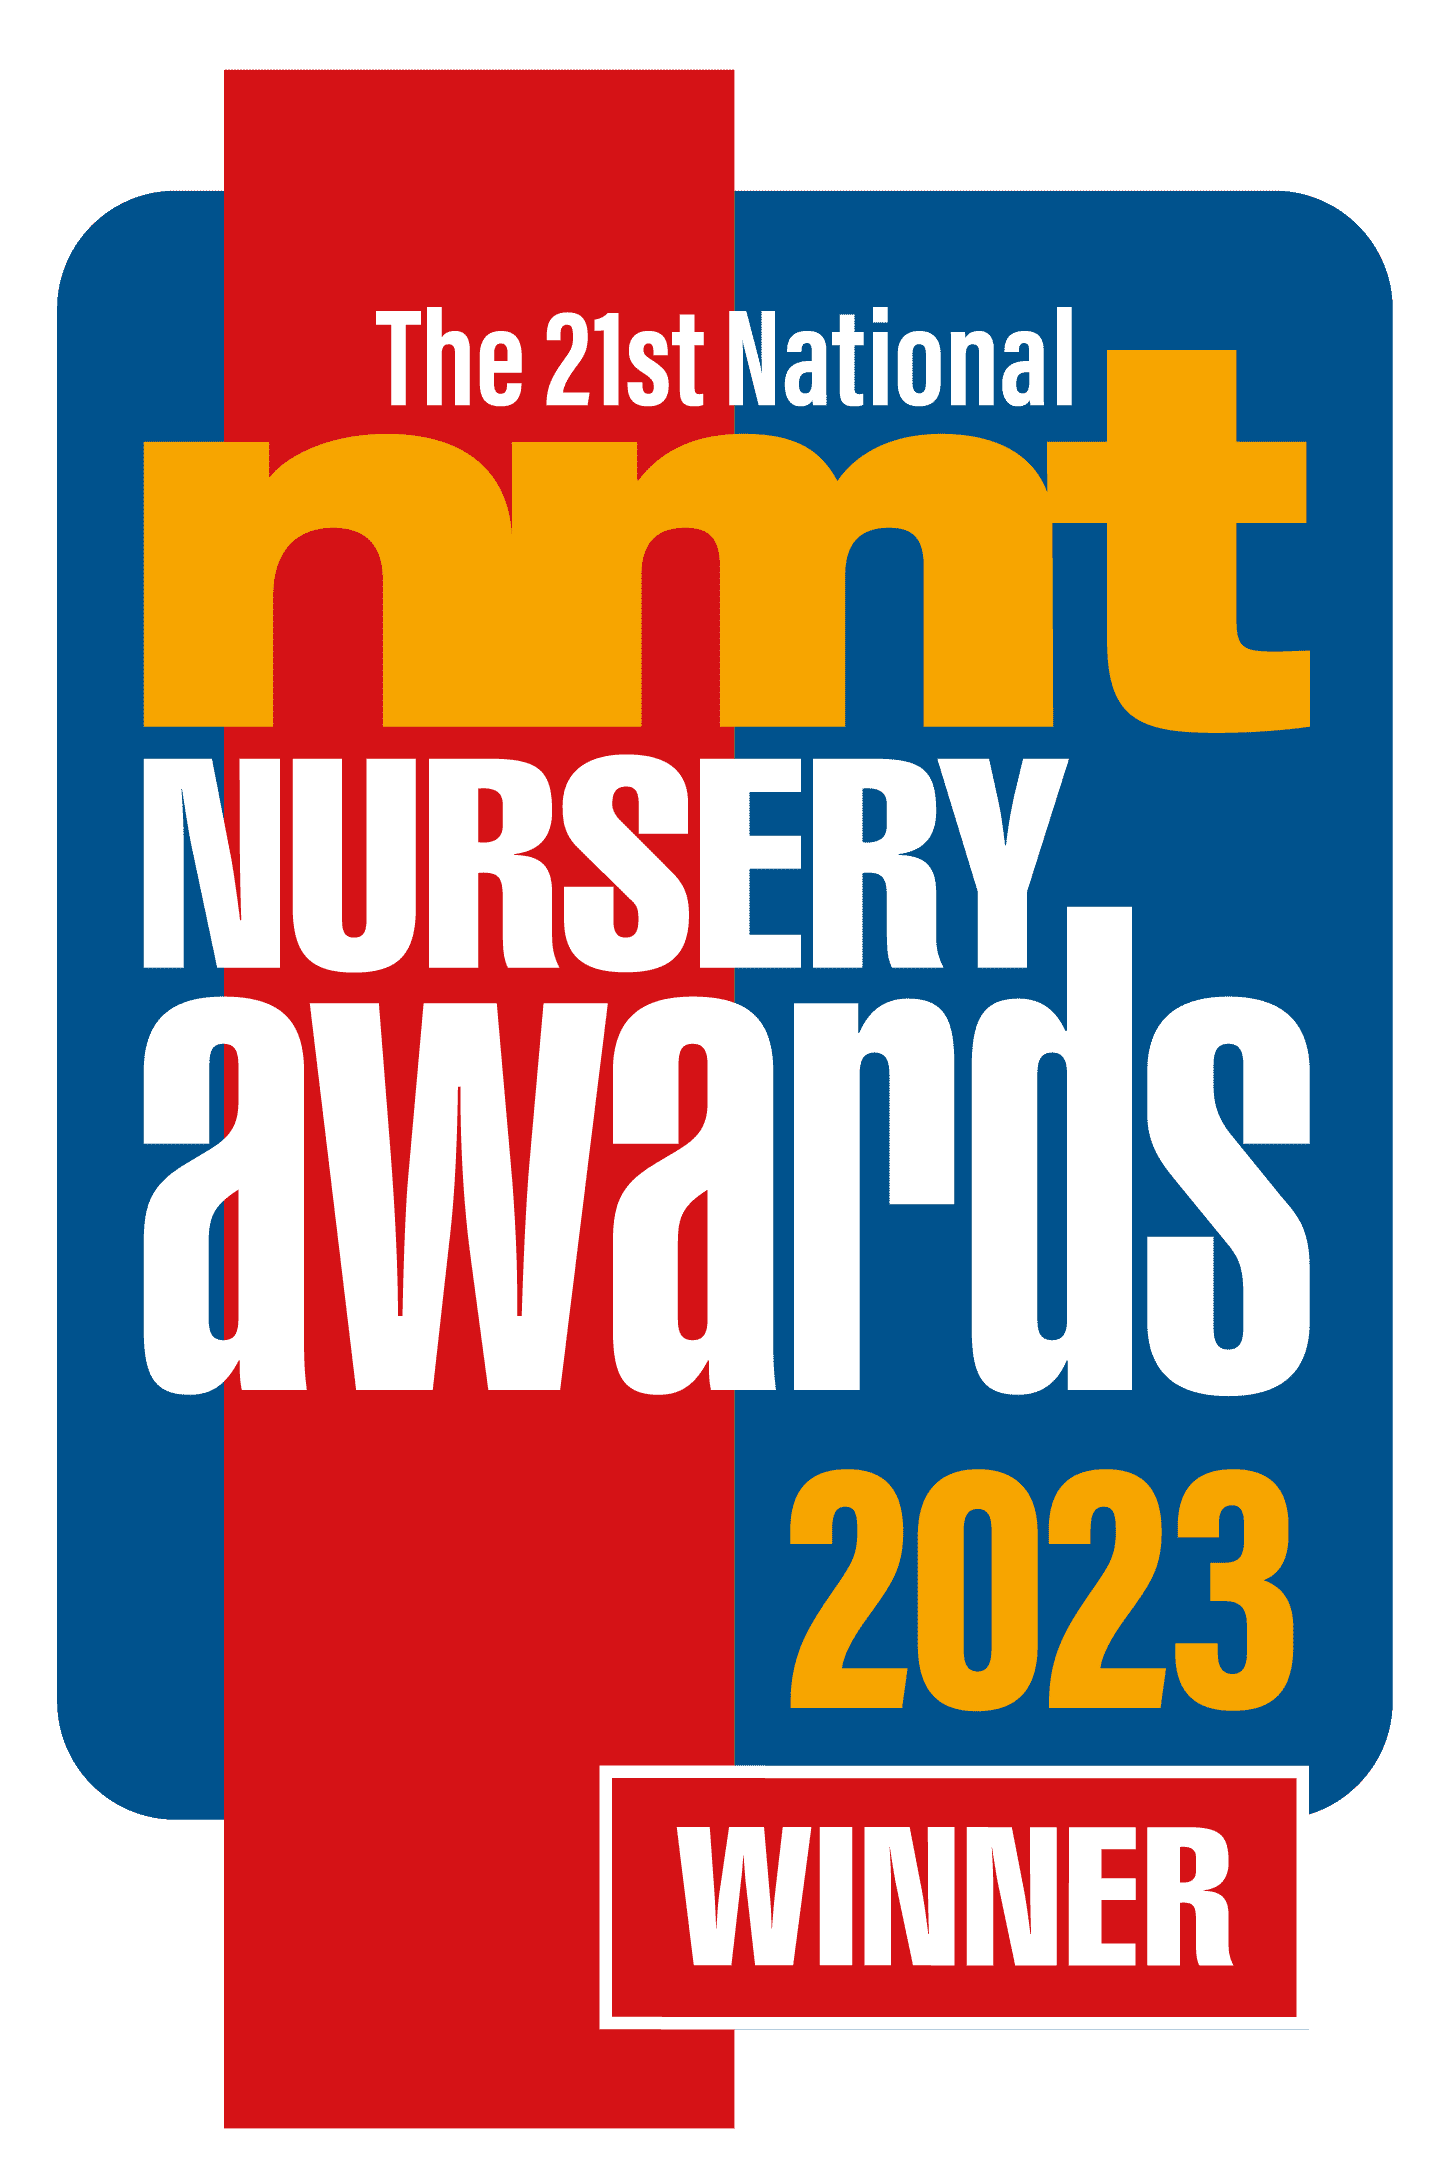 Large Nursery Group of The Year